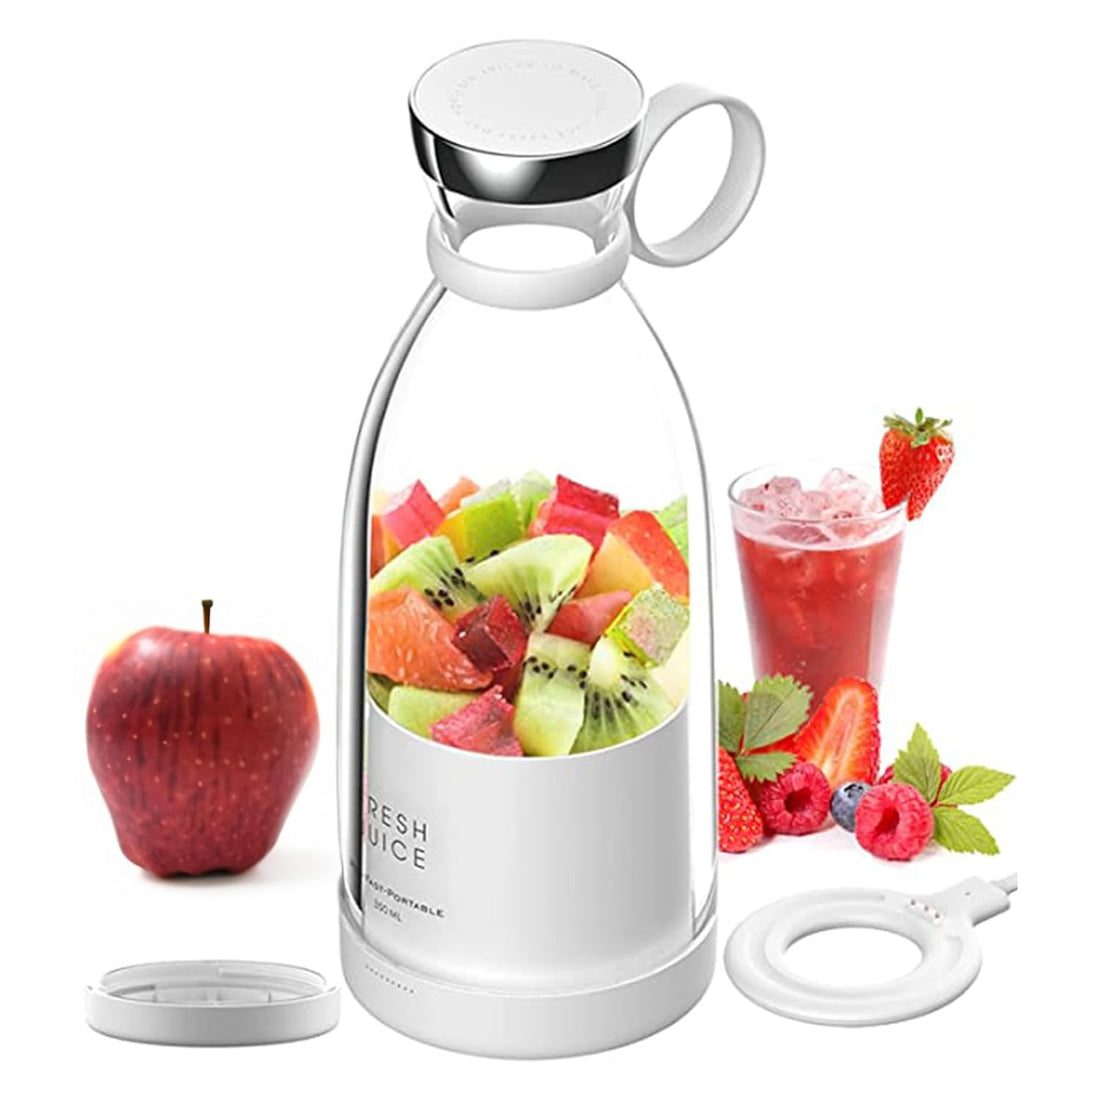 Portable Personal Blender for Fresh and Healthy Smoothies, Innovative Personal Blender for Busy Lifestyles and Travel Enthusiasts, 350ml